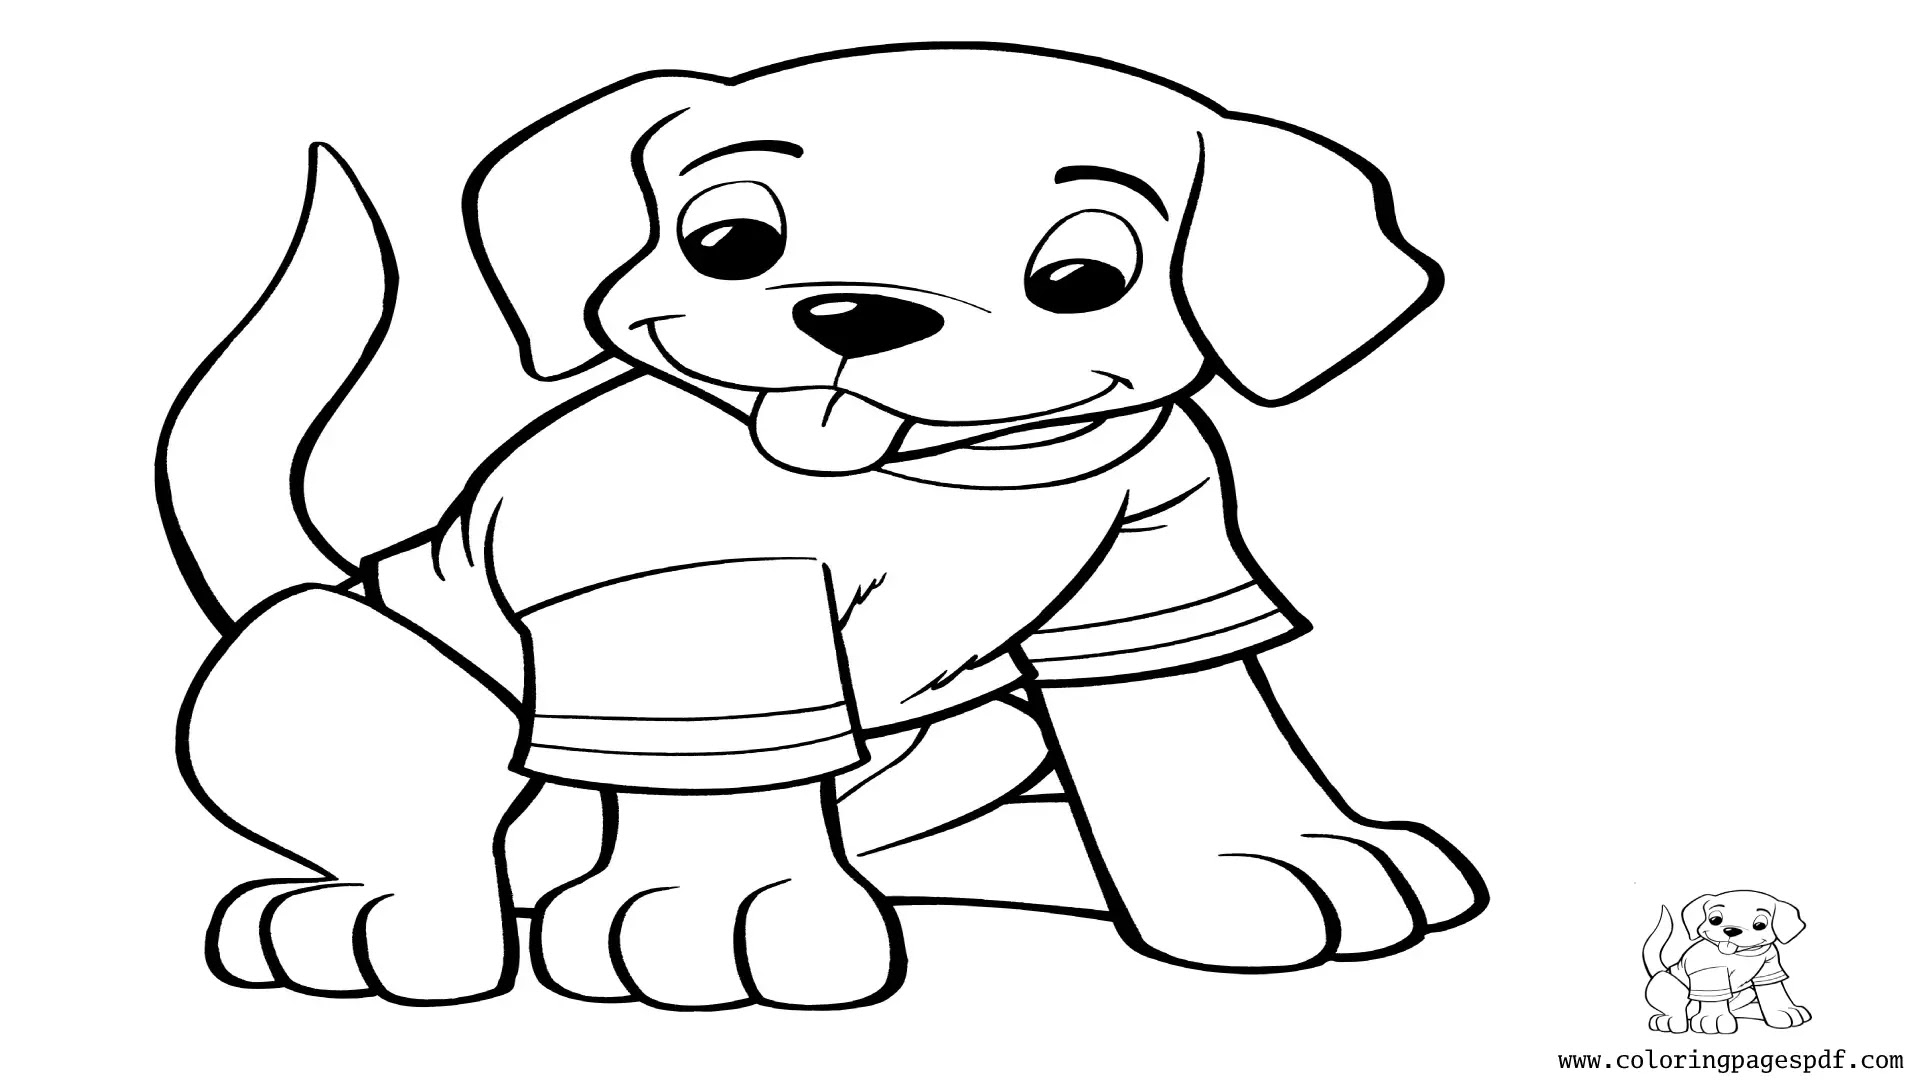 20 Cute Puppy Coloring Pages For Free